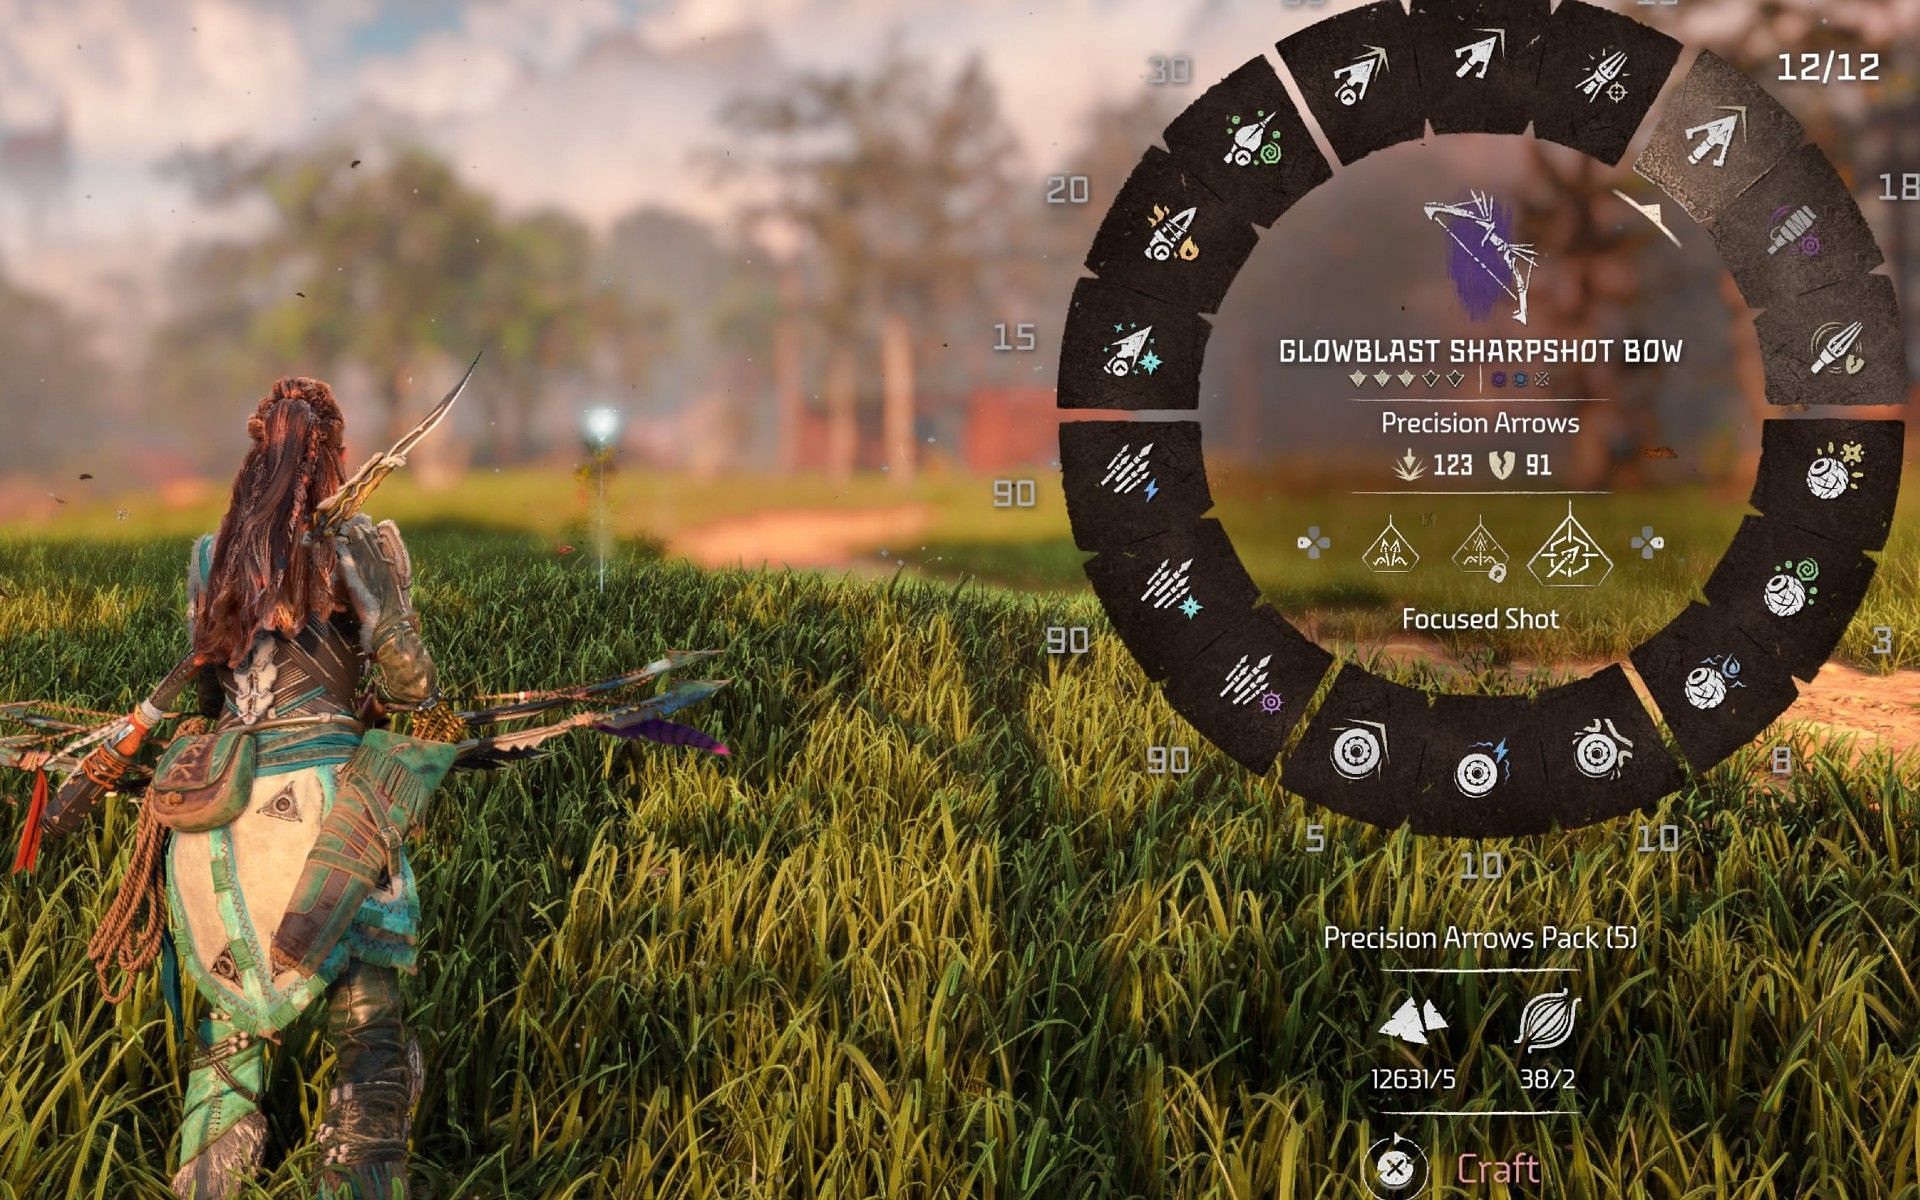 Use the weapon wheel to craft ammo. (Image via PlayStation)